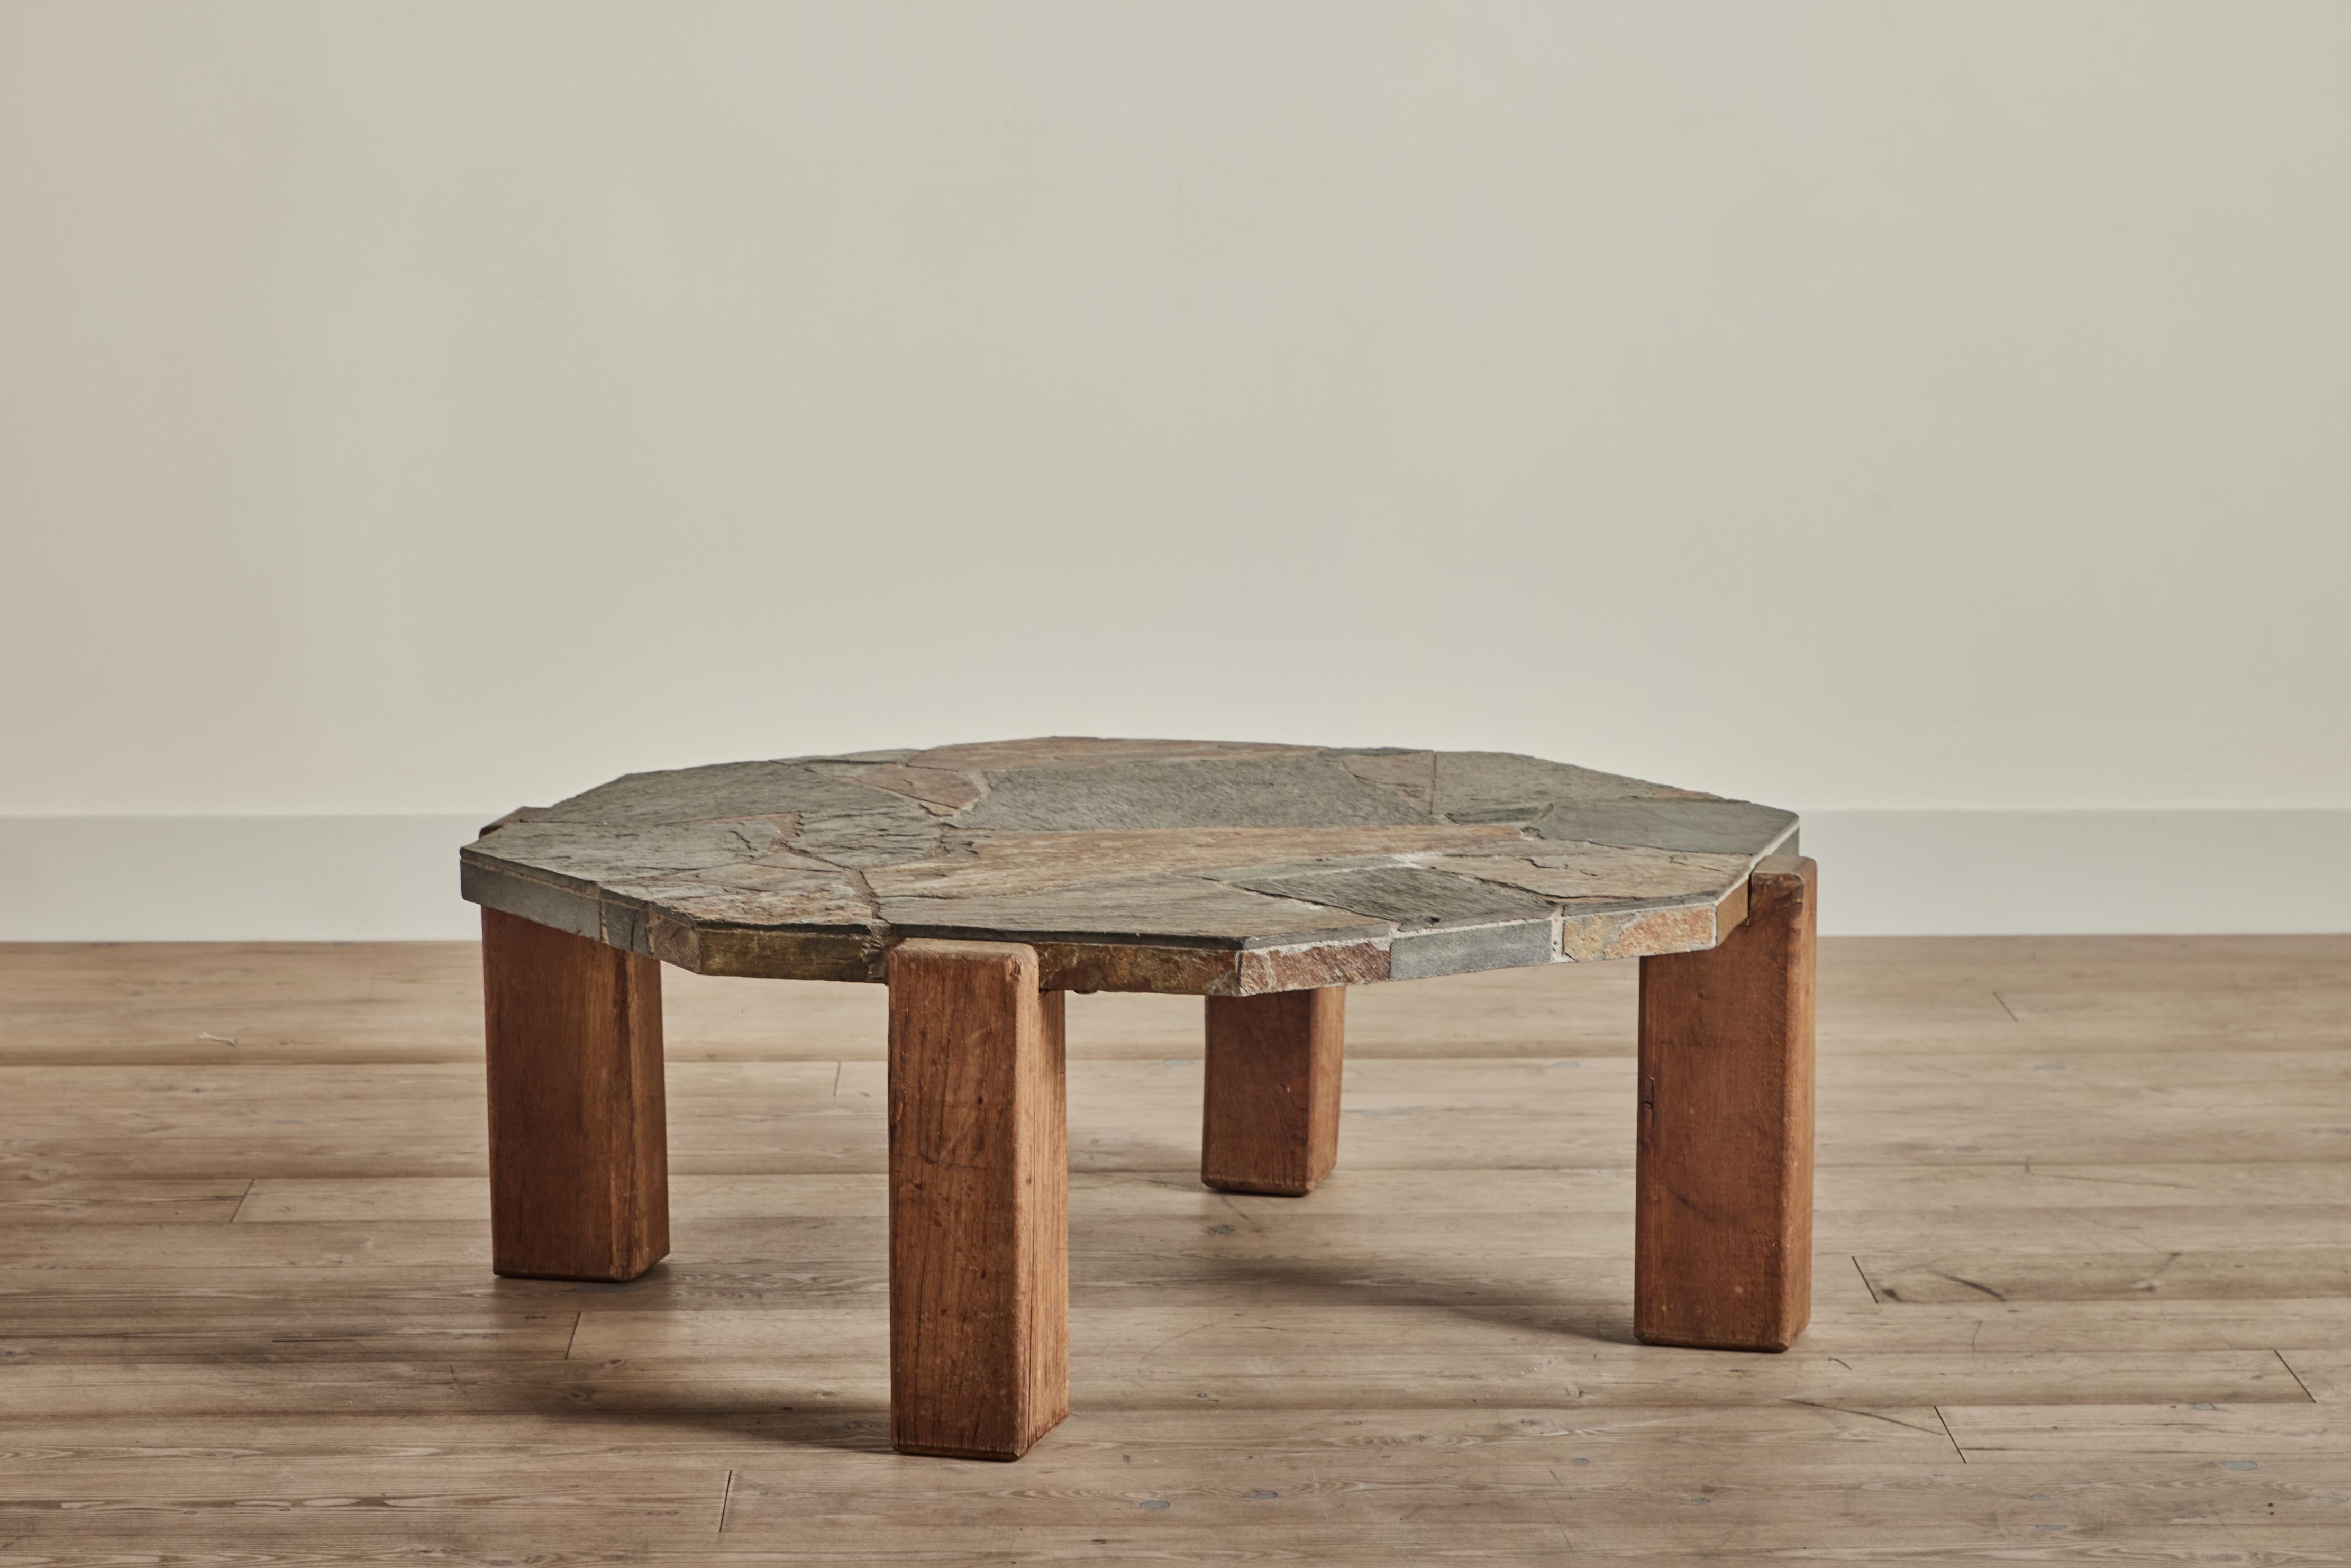 Slate top coffee table from Denmark circa 1970. This table has a heavy octagonal mosaic slate top with block wood legs. Wear on table is consistent with age and use. 